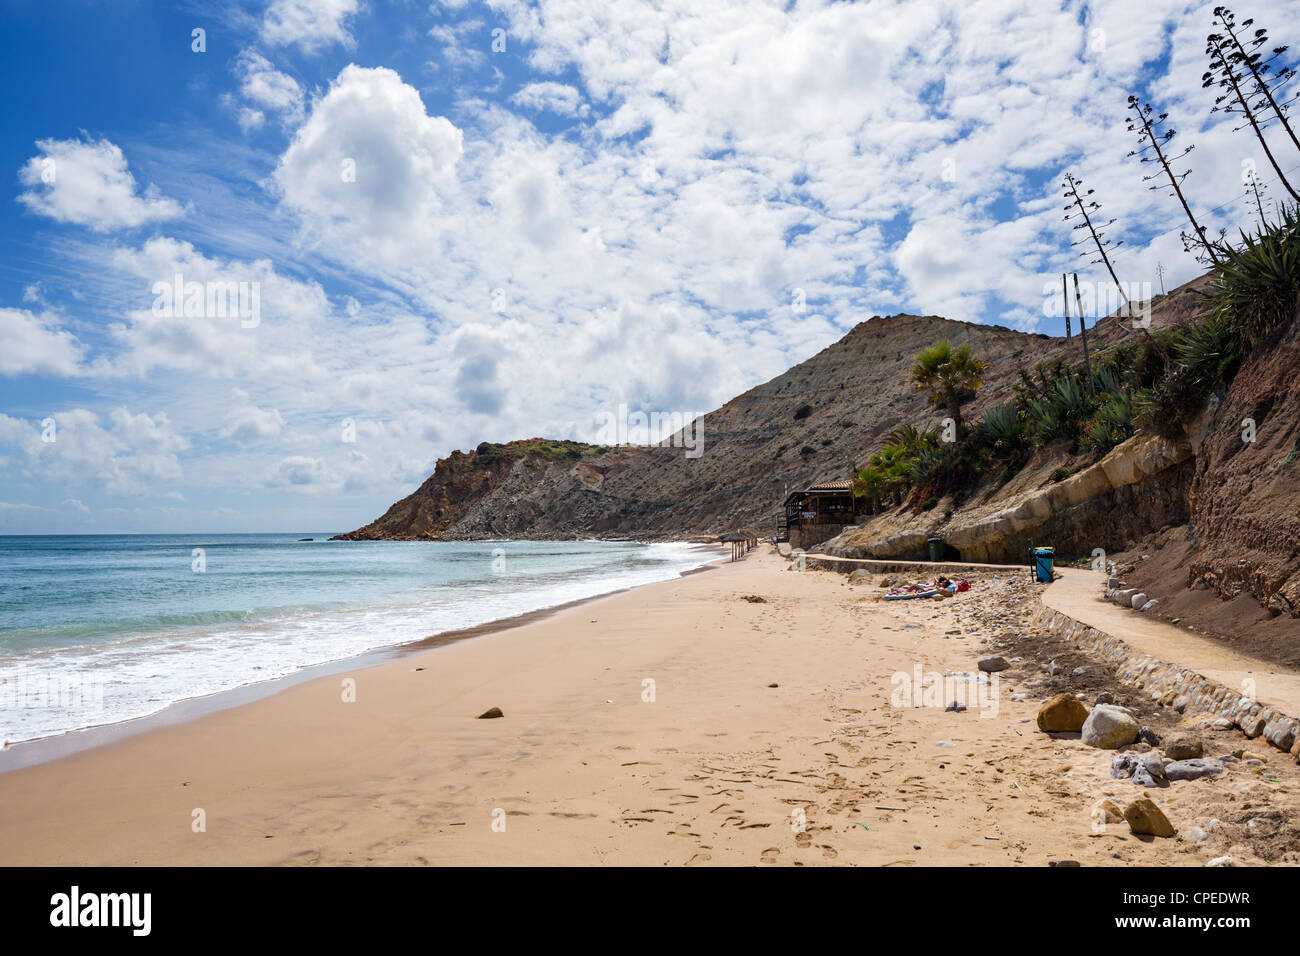 Beach in the small fishing village of Burgau on the coast between Sagres and Lagos, Algarve, Portugal Stock Photo